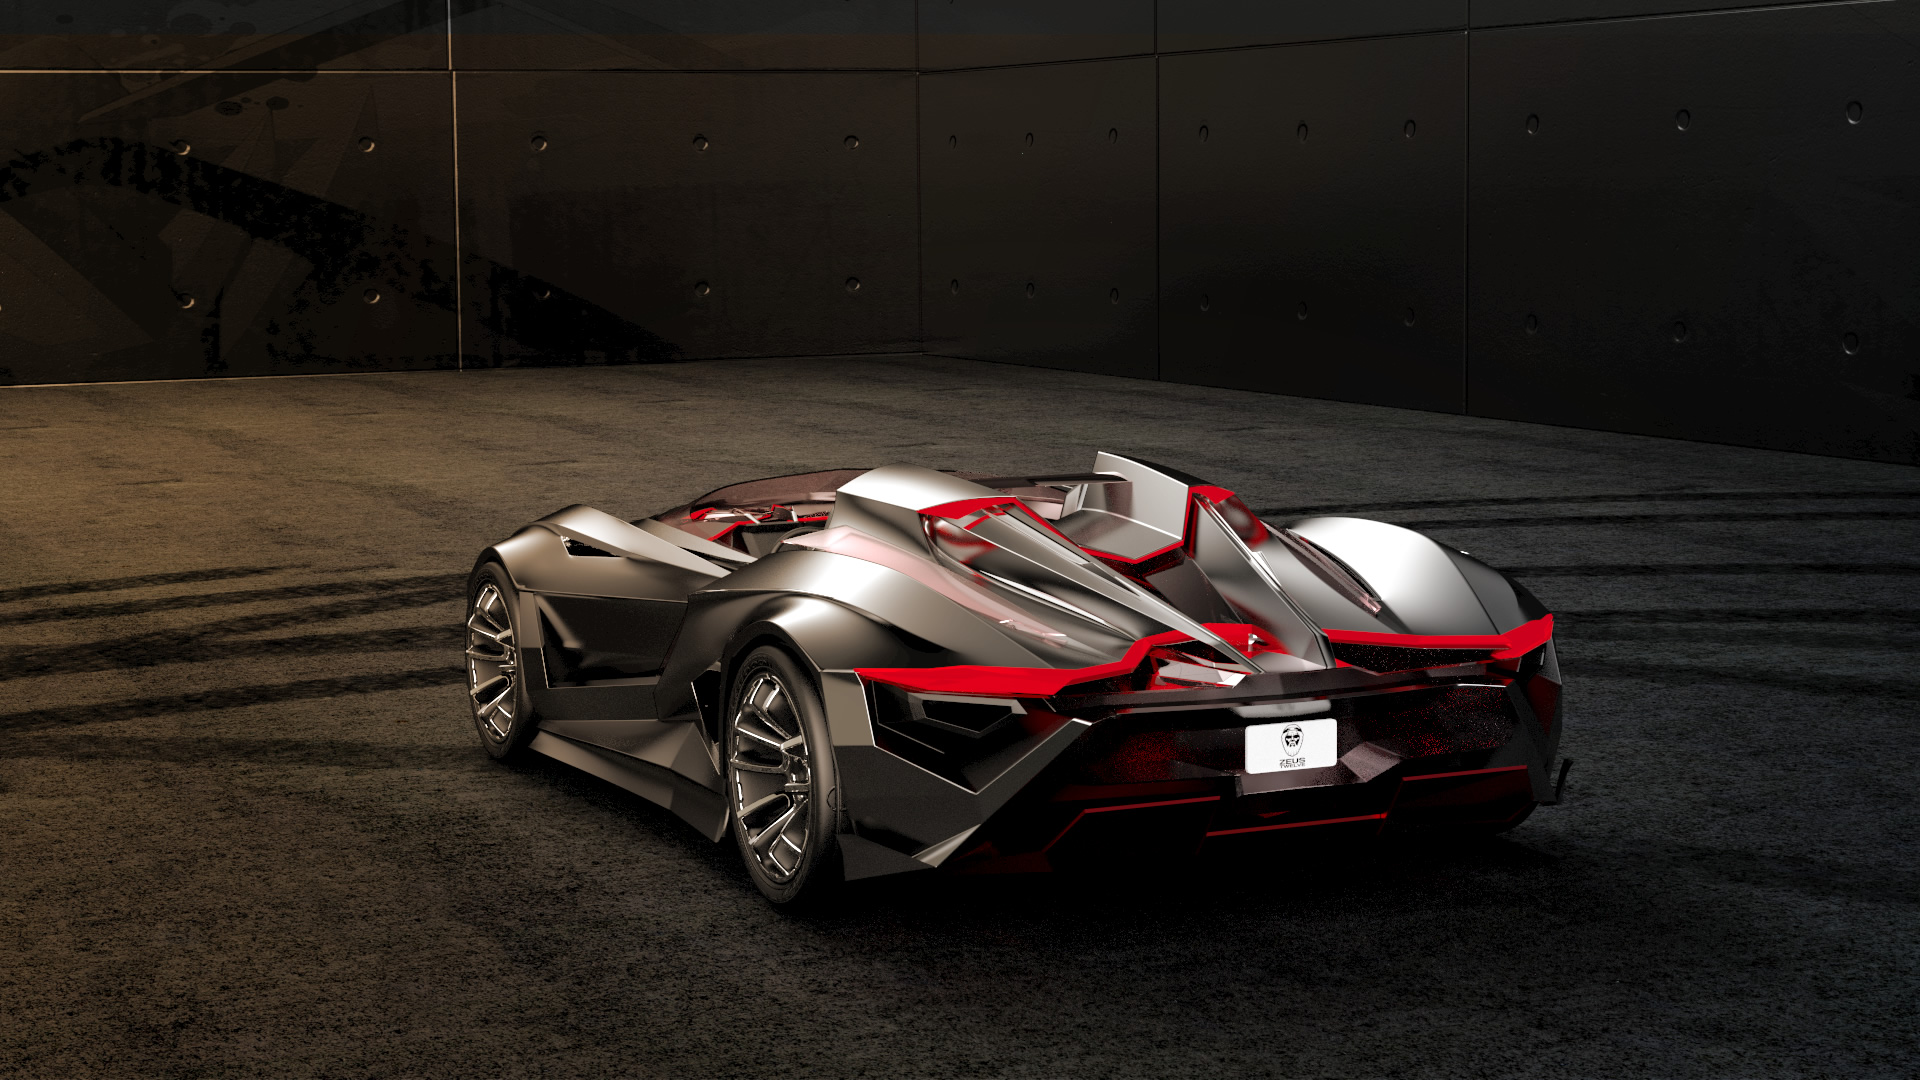 This Awesome Roadster Should Be The New Batmobile